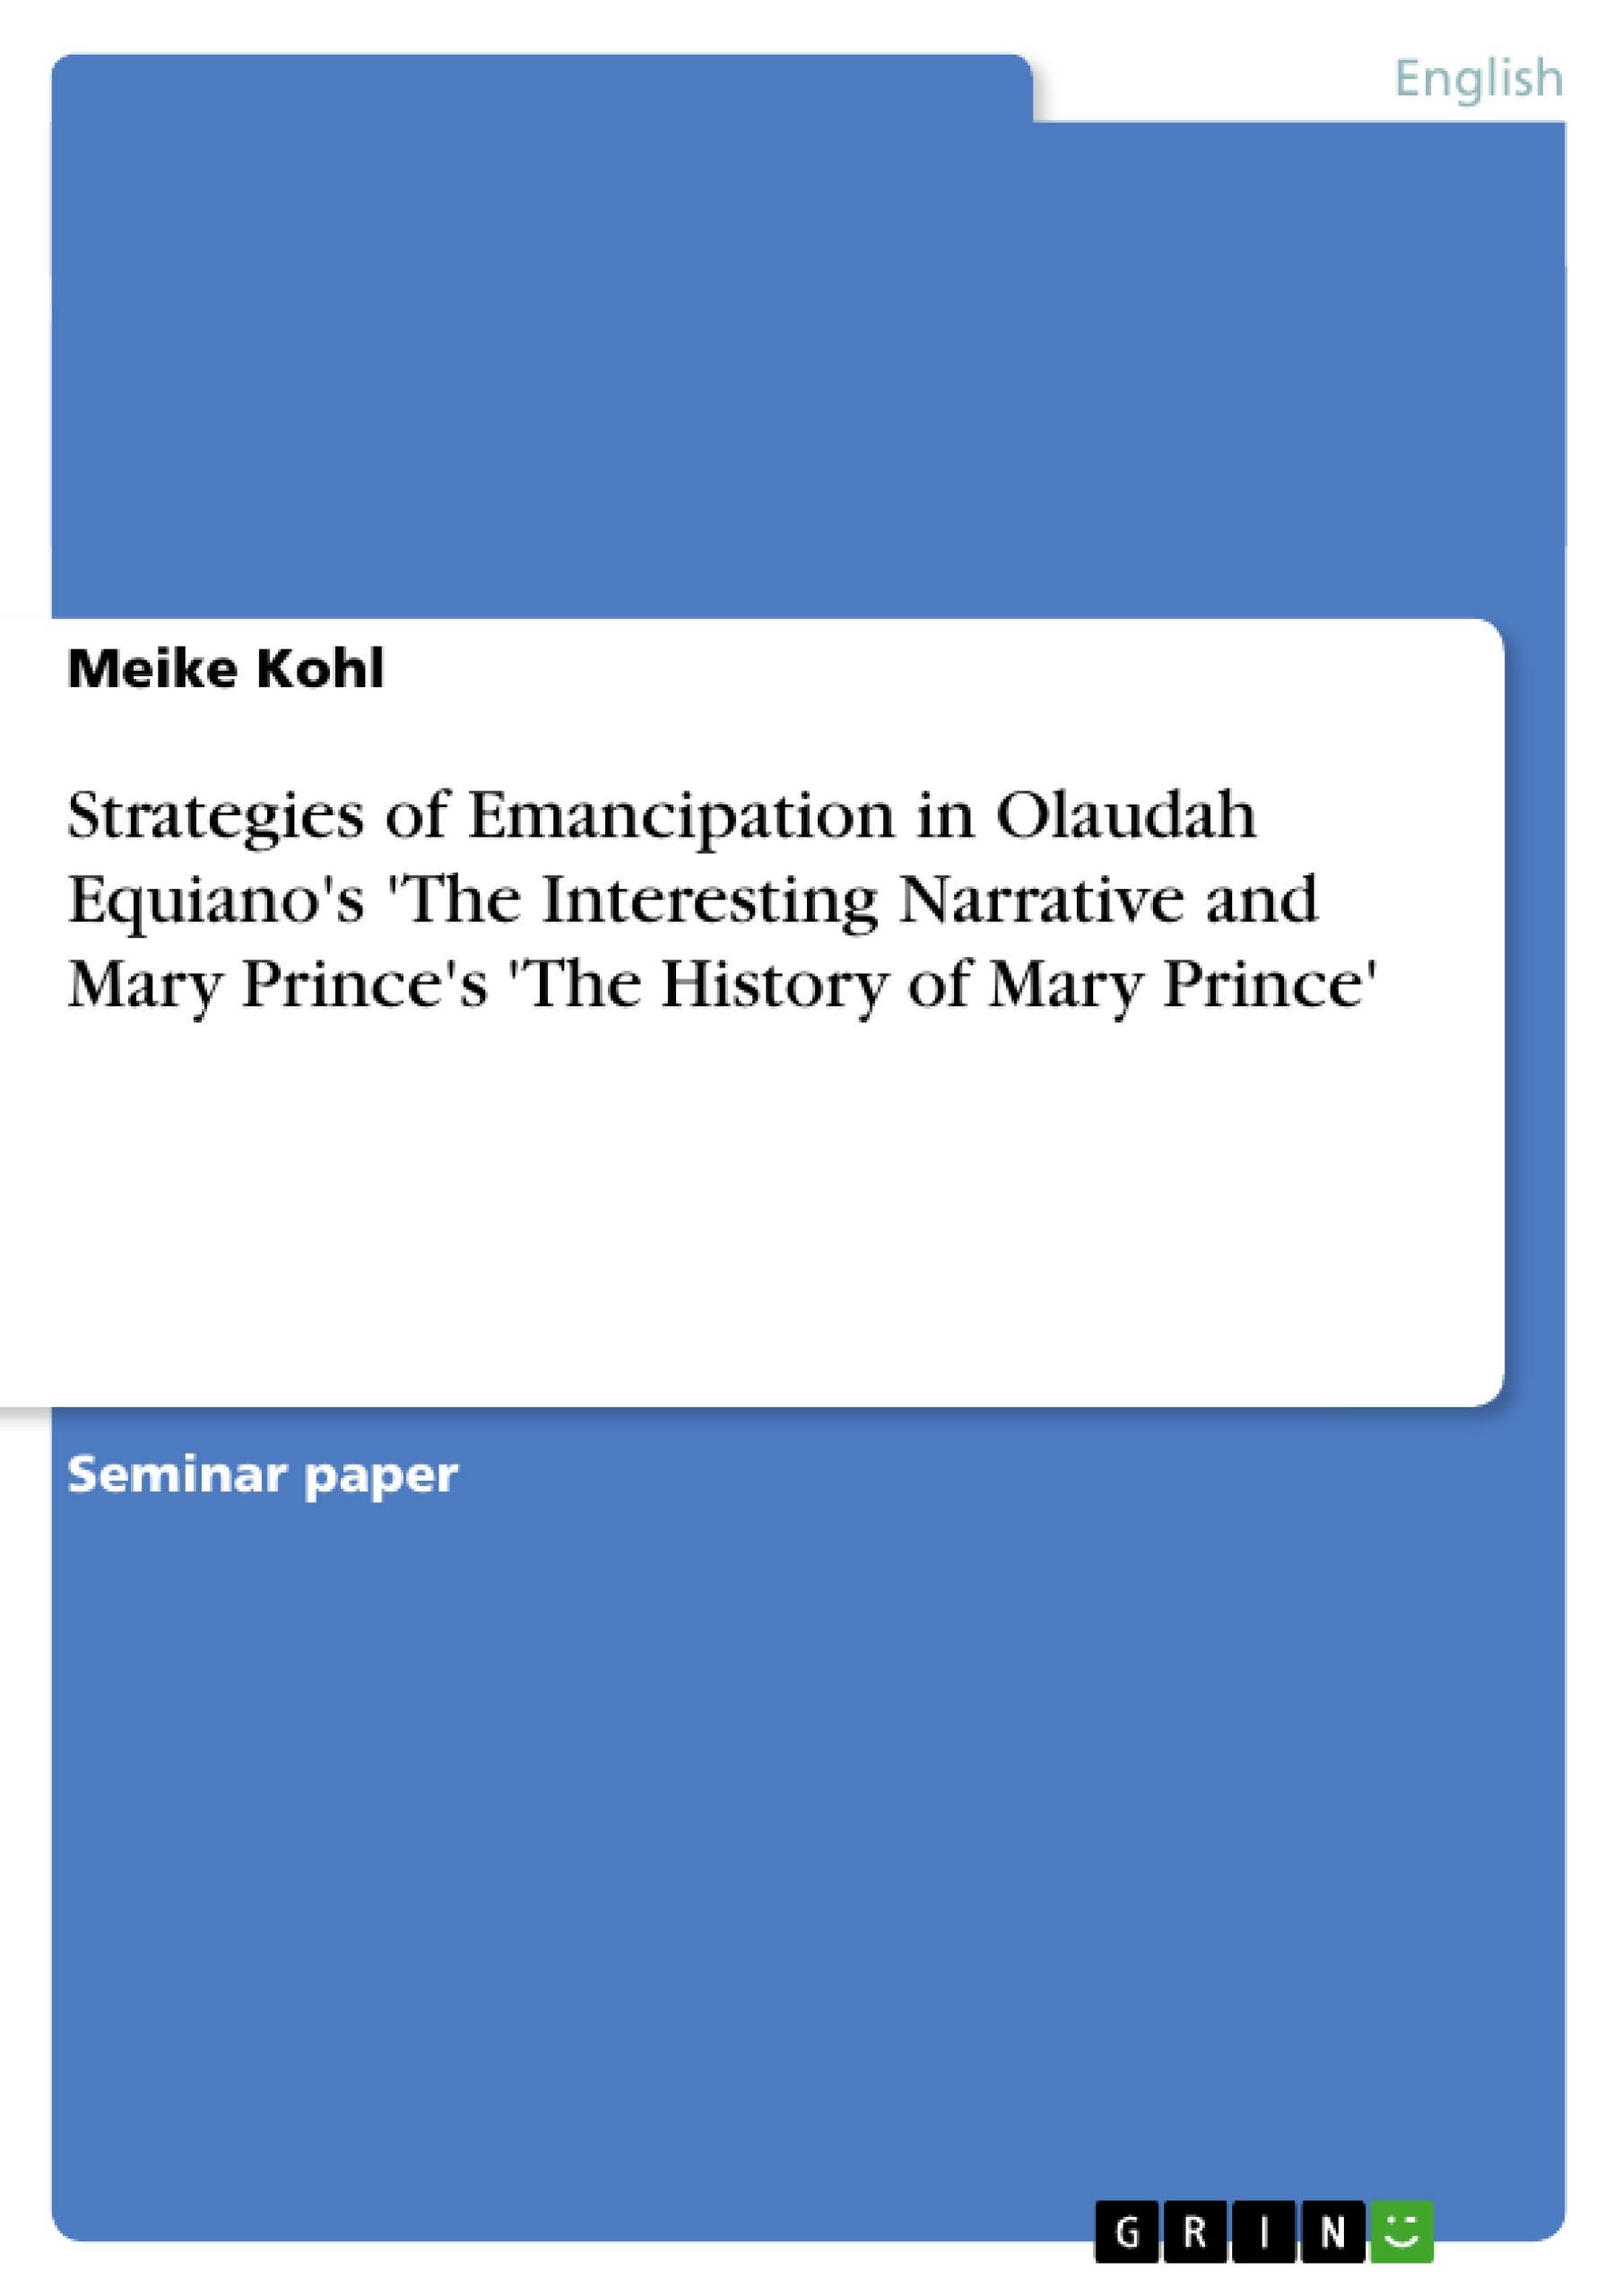 Titre: Strategies of Emancipation in Olaudah Equiano's 'The Interesting Narrative and Mary Prince's 'The History of Mary Prince'